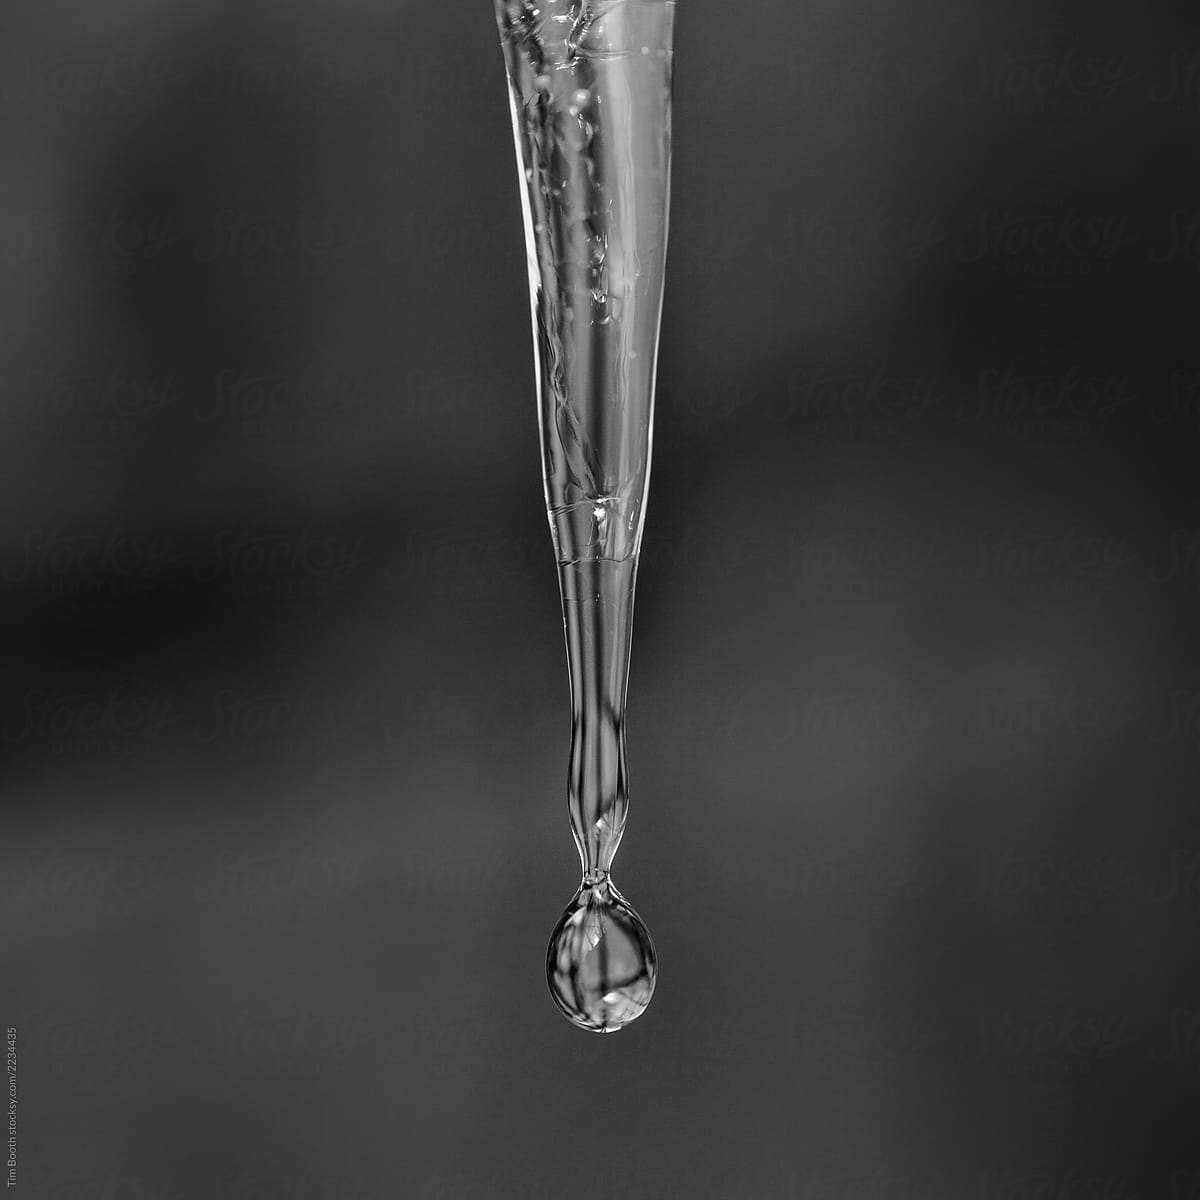 A single icicle and water drop